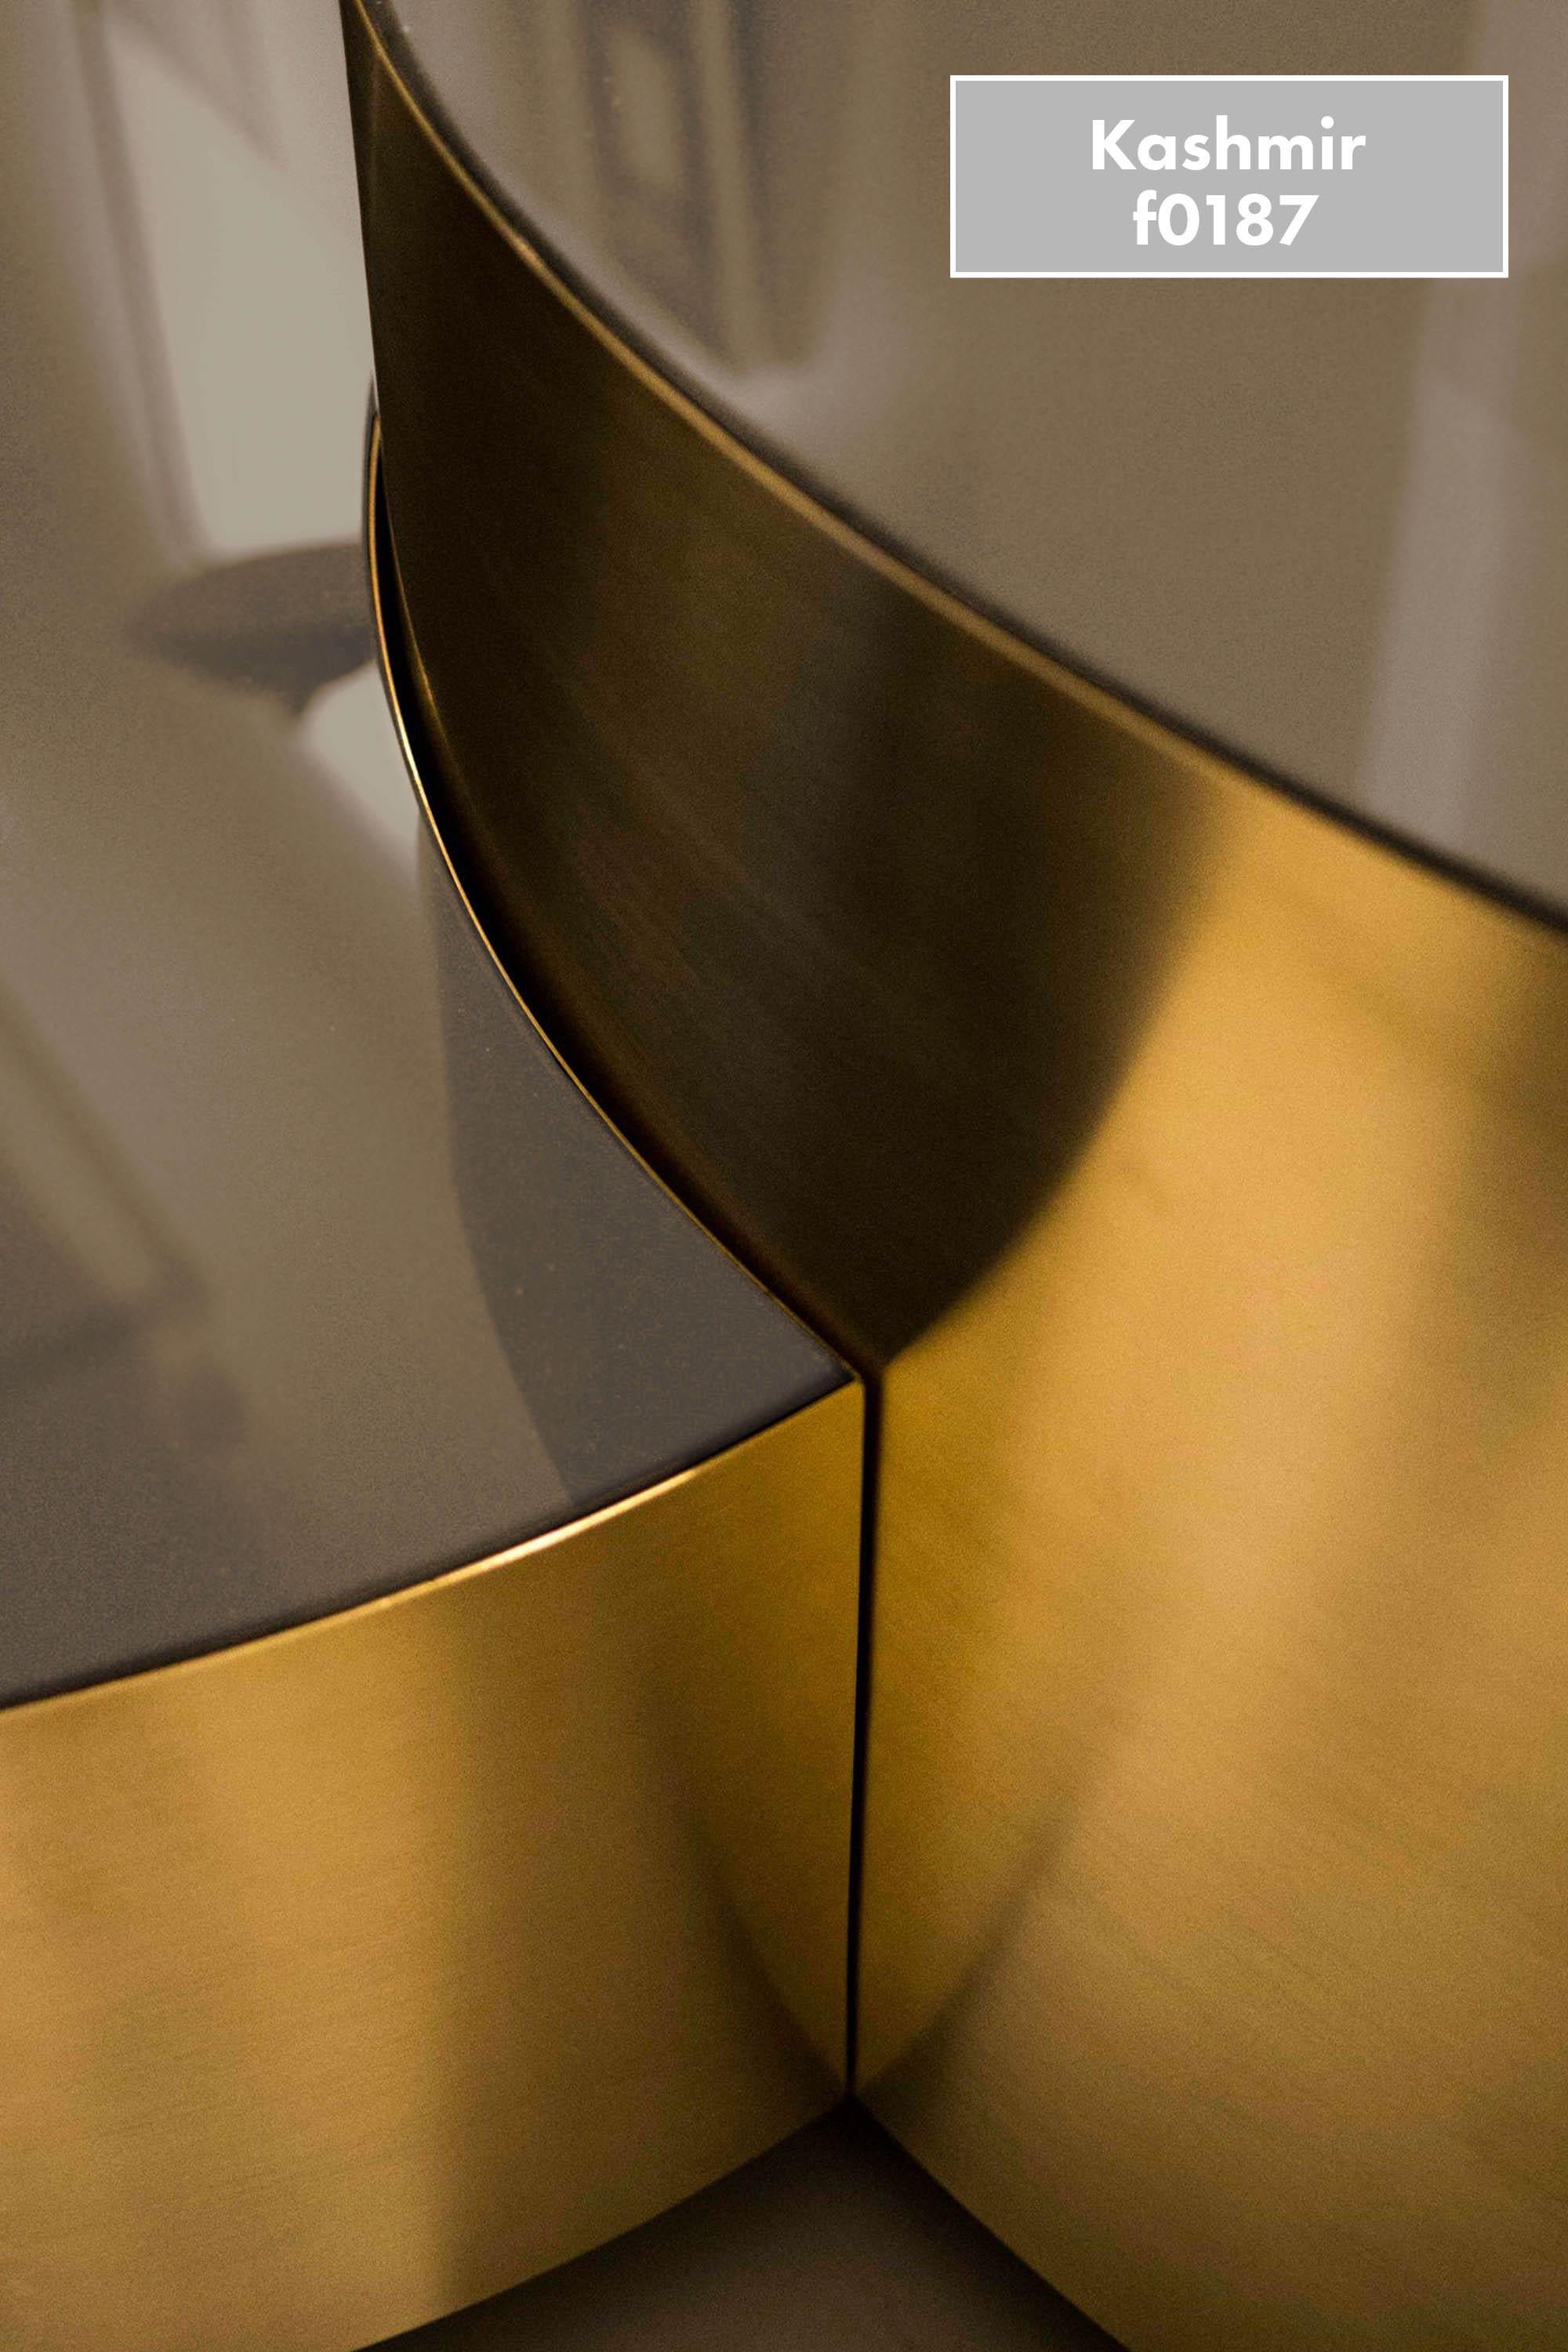 Set of Two Side Tables, Moon Shapes, Brass & HighGloss Laminate, Handcrafted - M For Sale 3